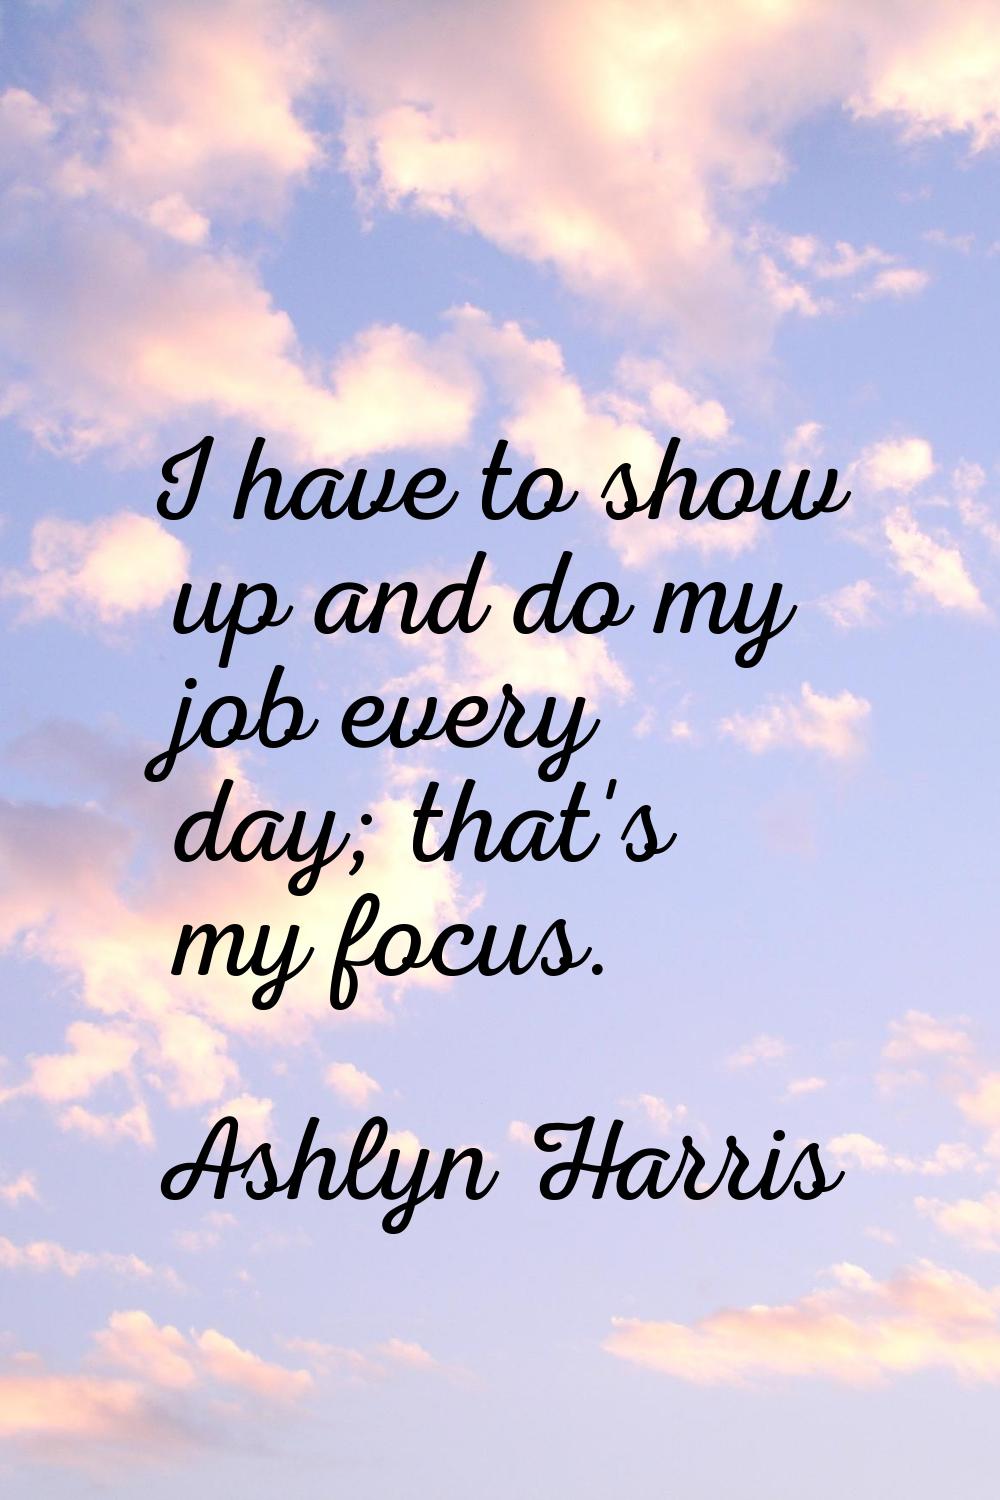 I have to show up and do my job every day; that's my focus.